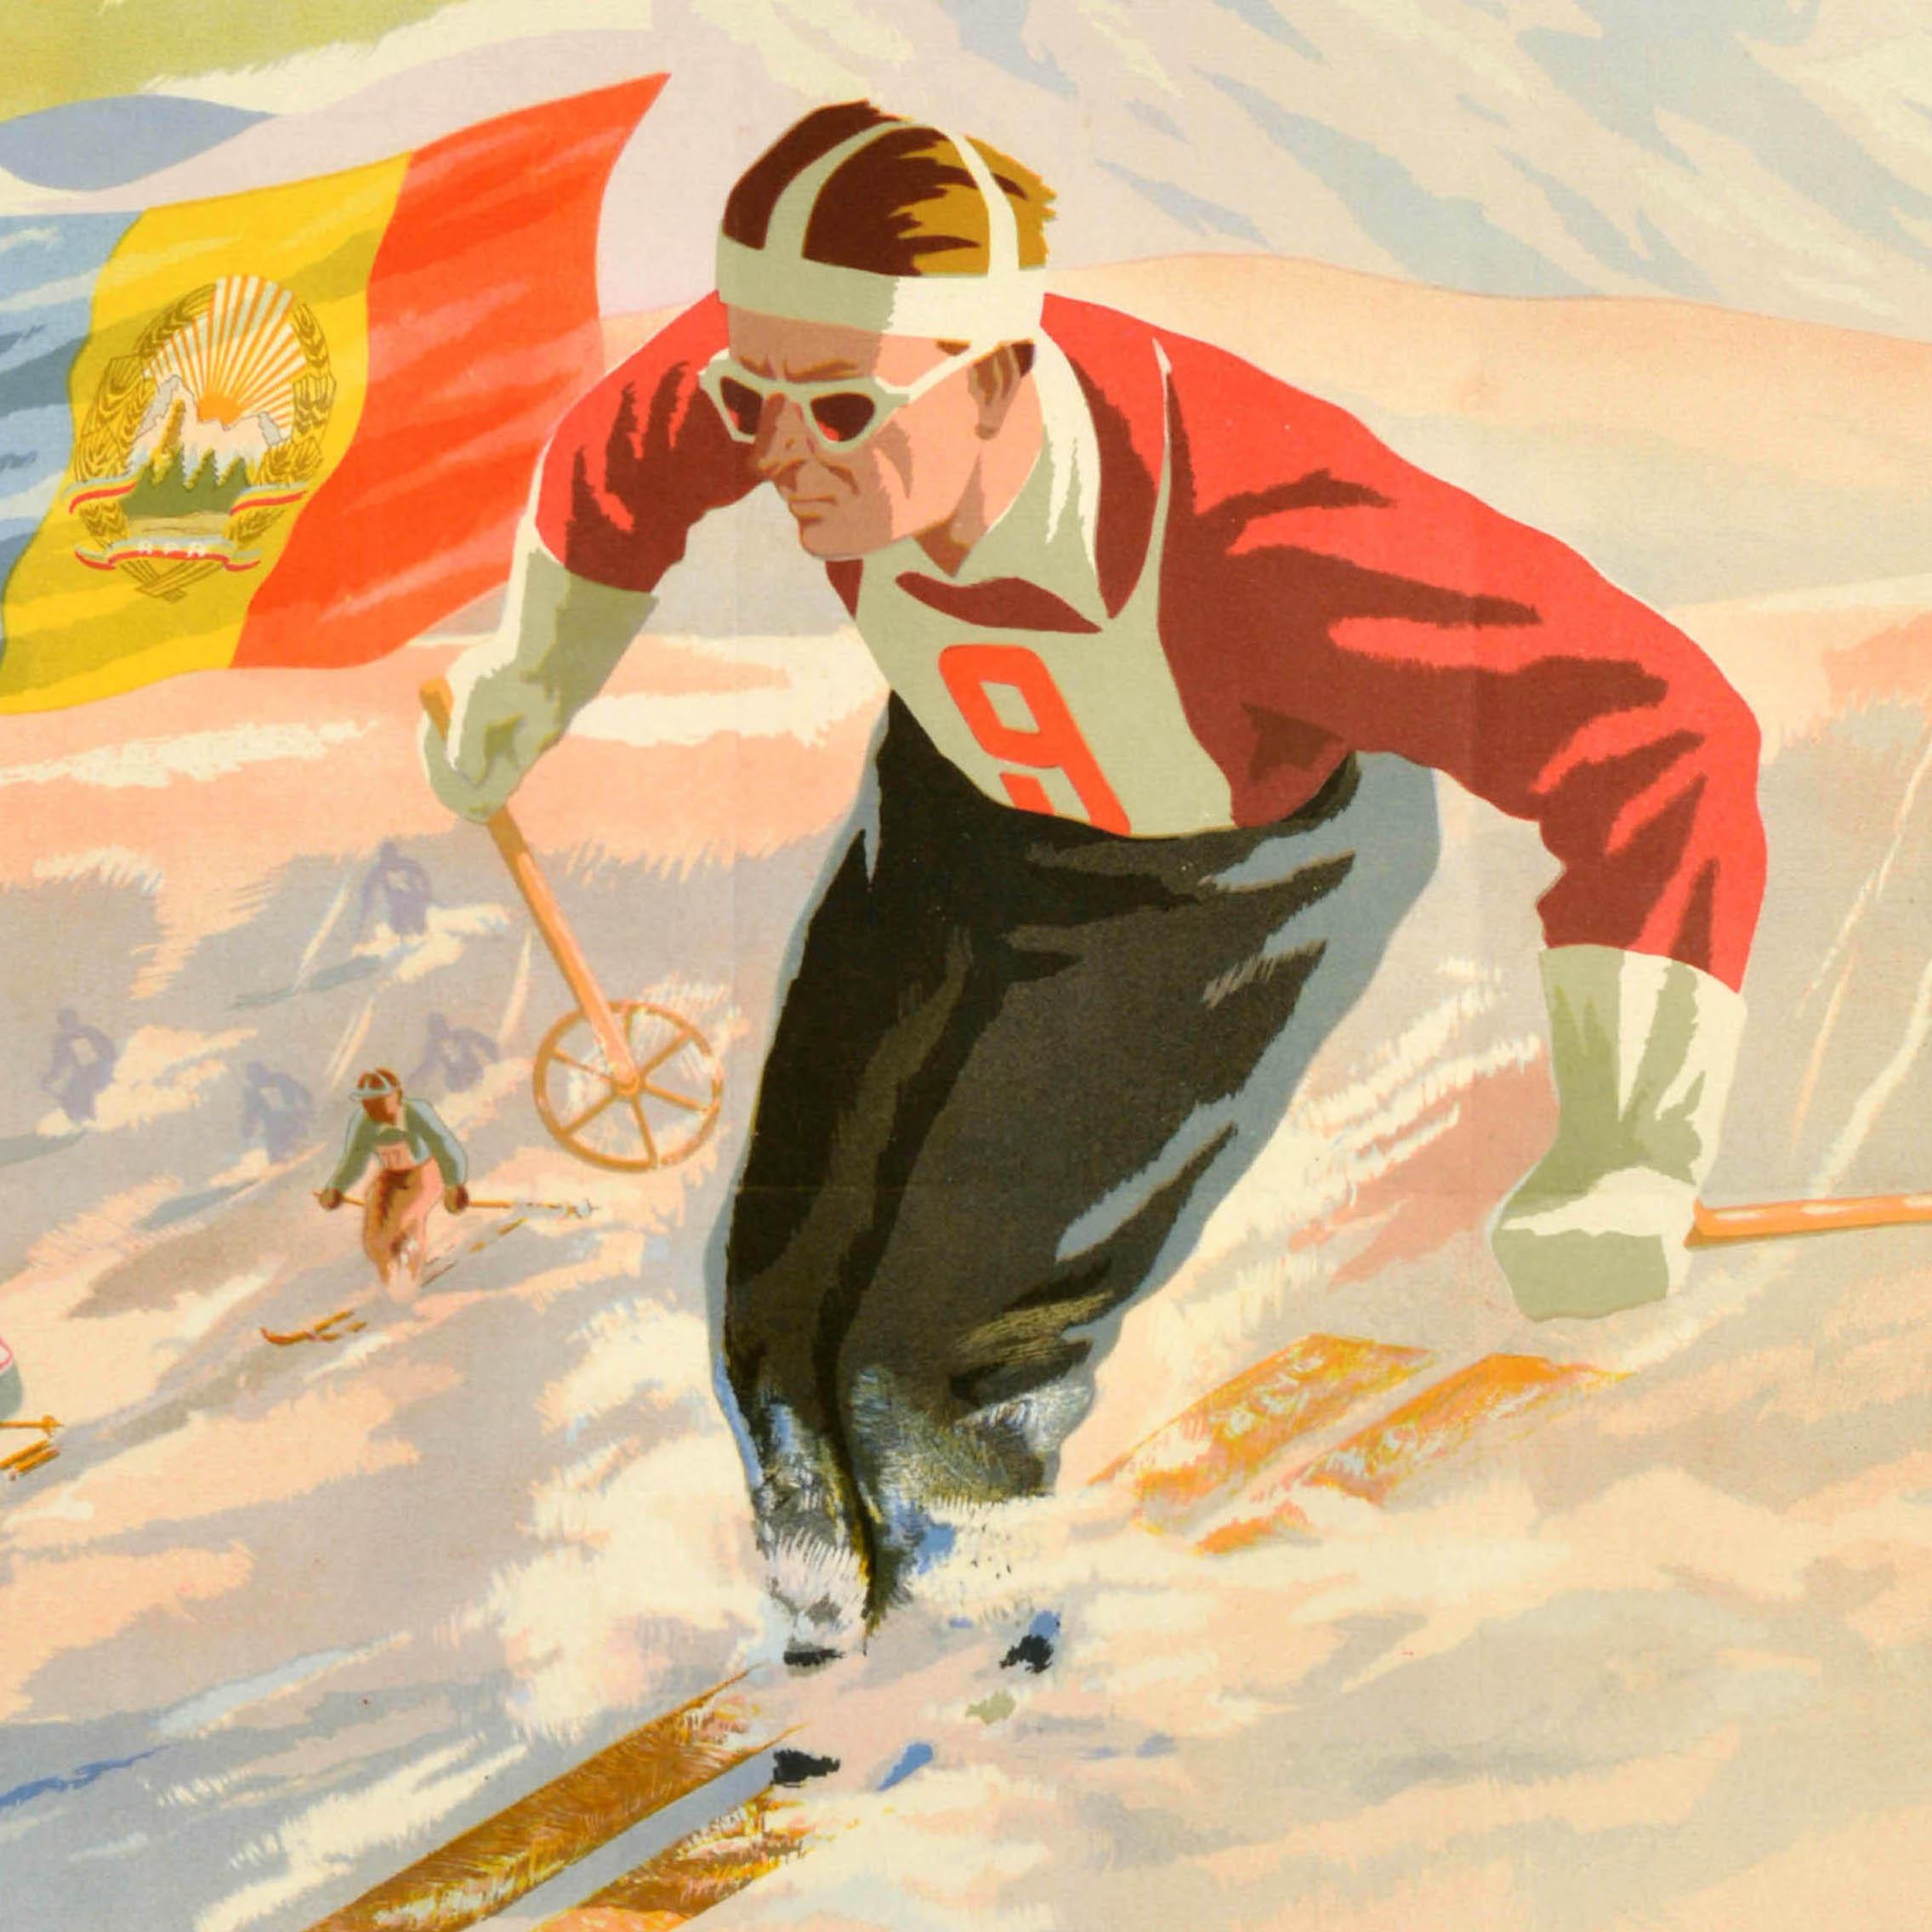 Original vintage sport poster for the International Student Union IX World University Winter Games held from 28 January - 4 February 1951 in Poiana Romania featuring dynamic artwork depicting a skier wearing a number 9 racing bid skiing down the